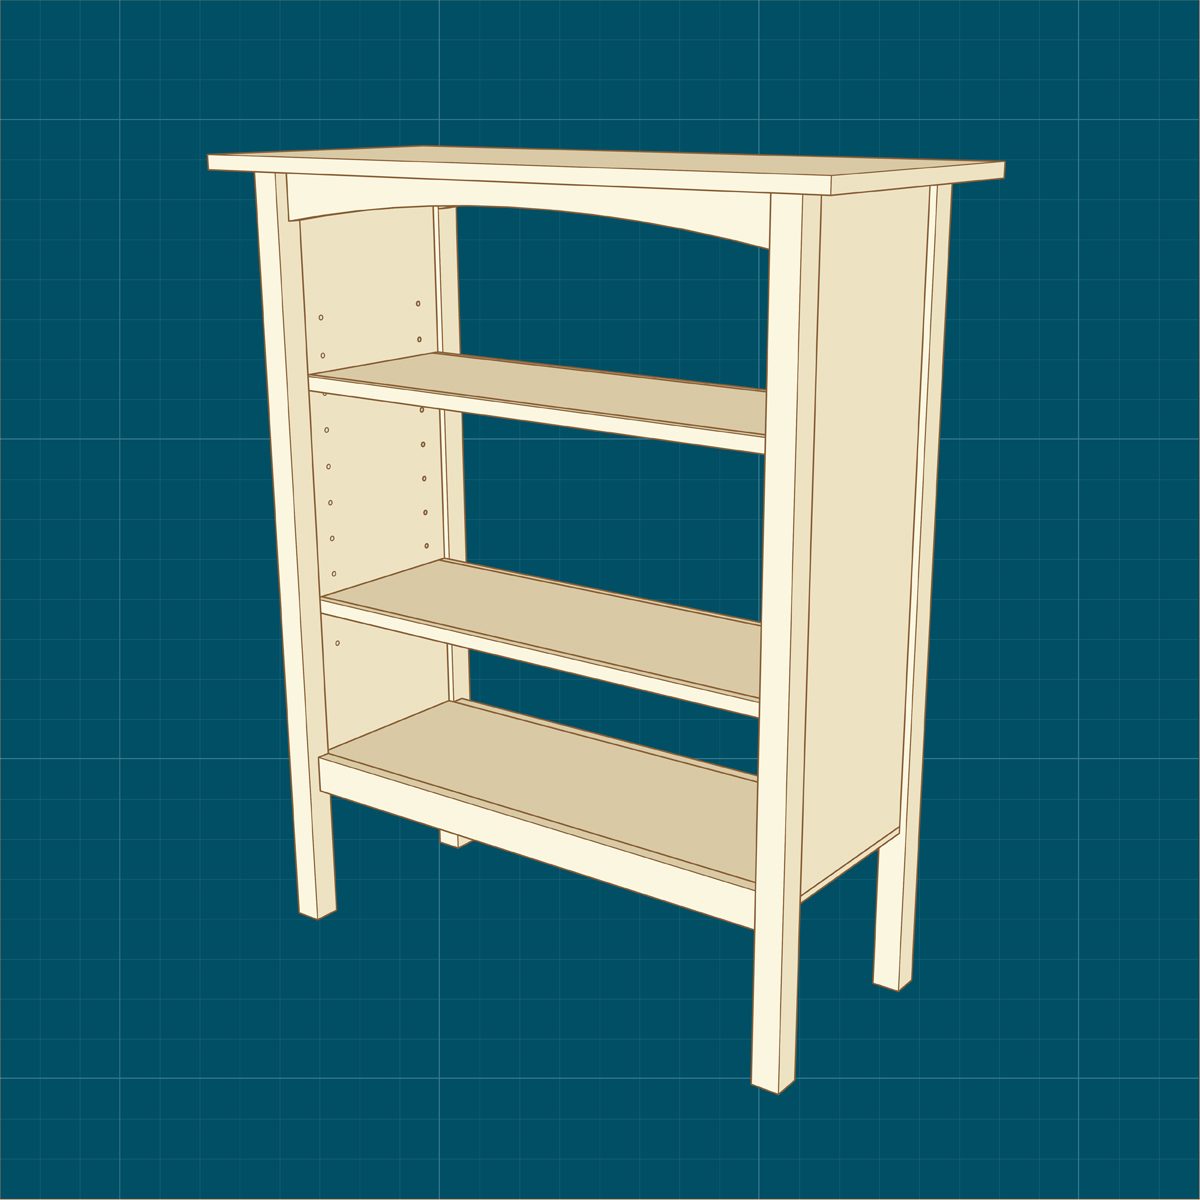 How to Make a Bookcase